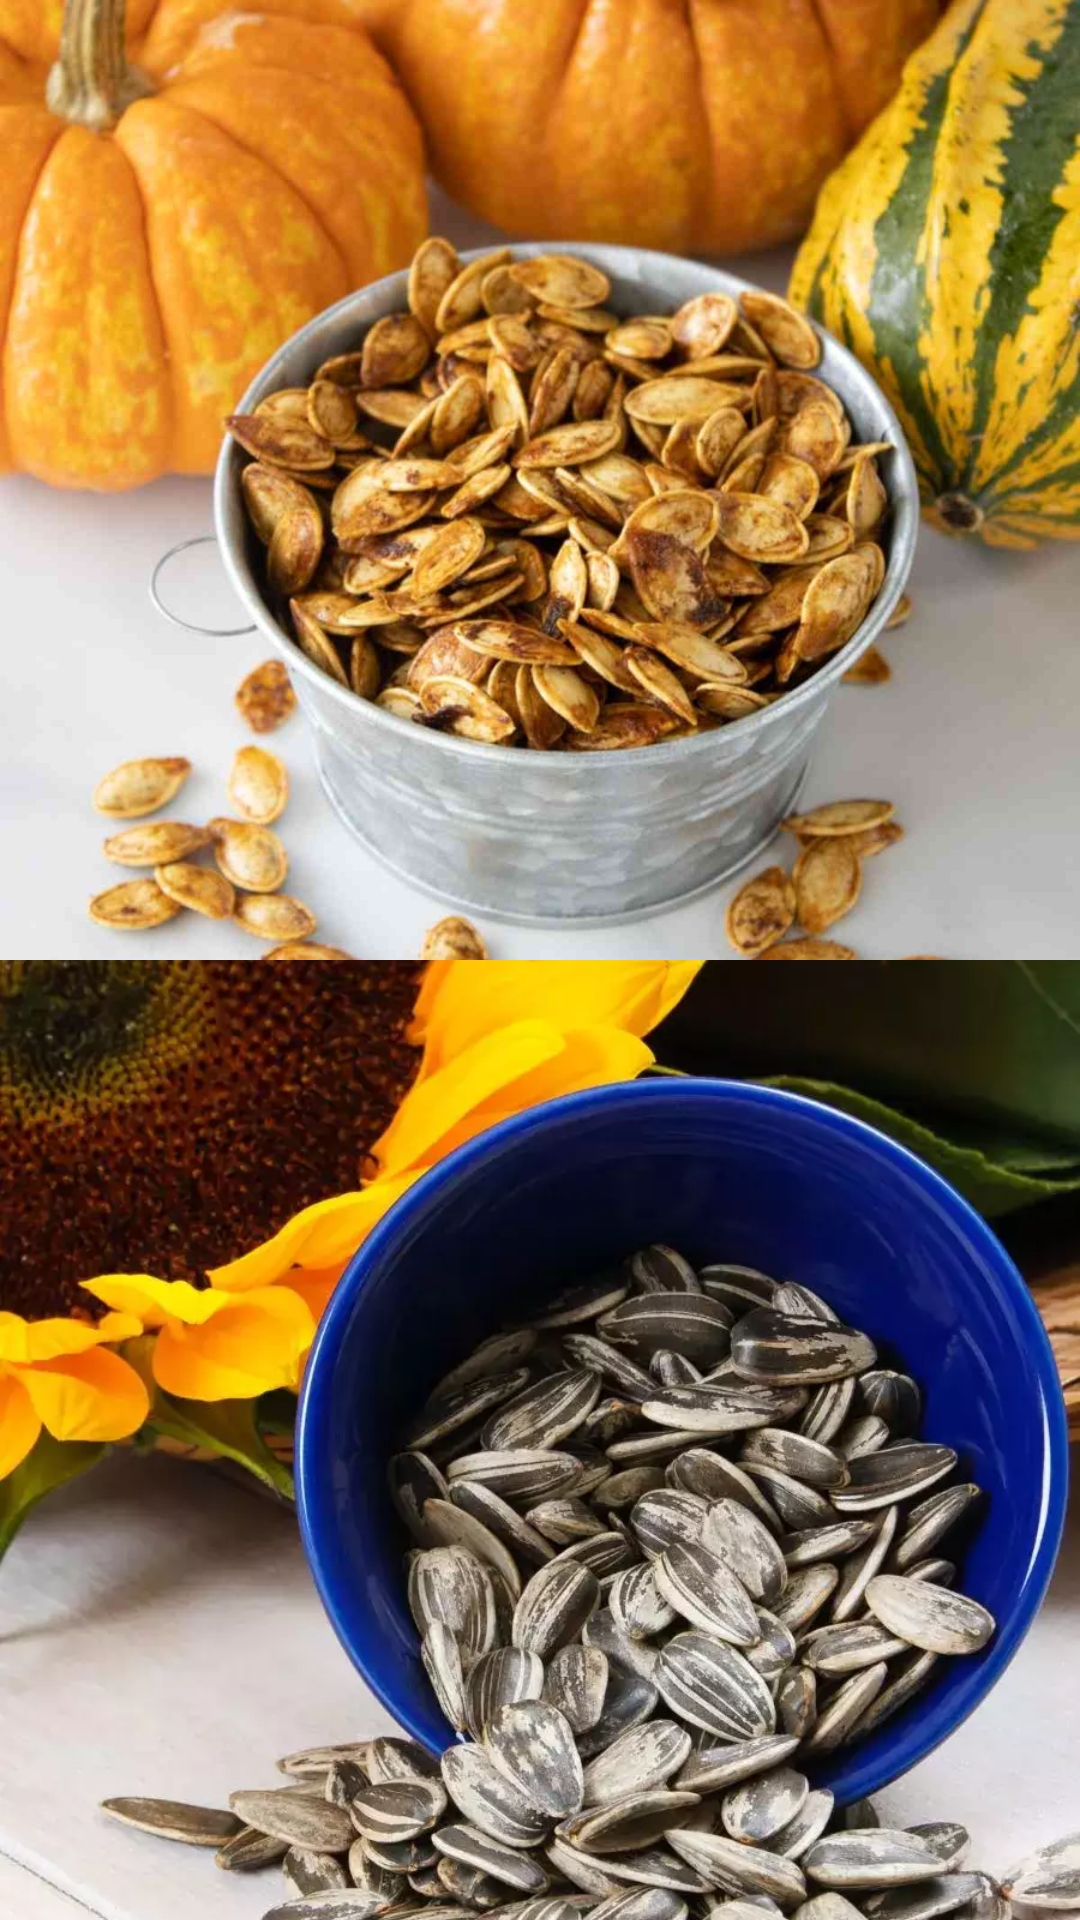 5 seeds that help in quick weight loss